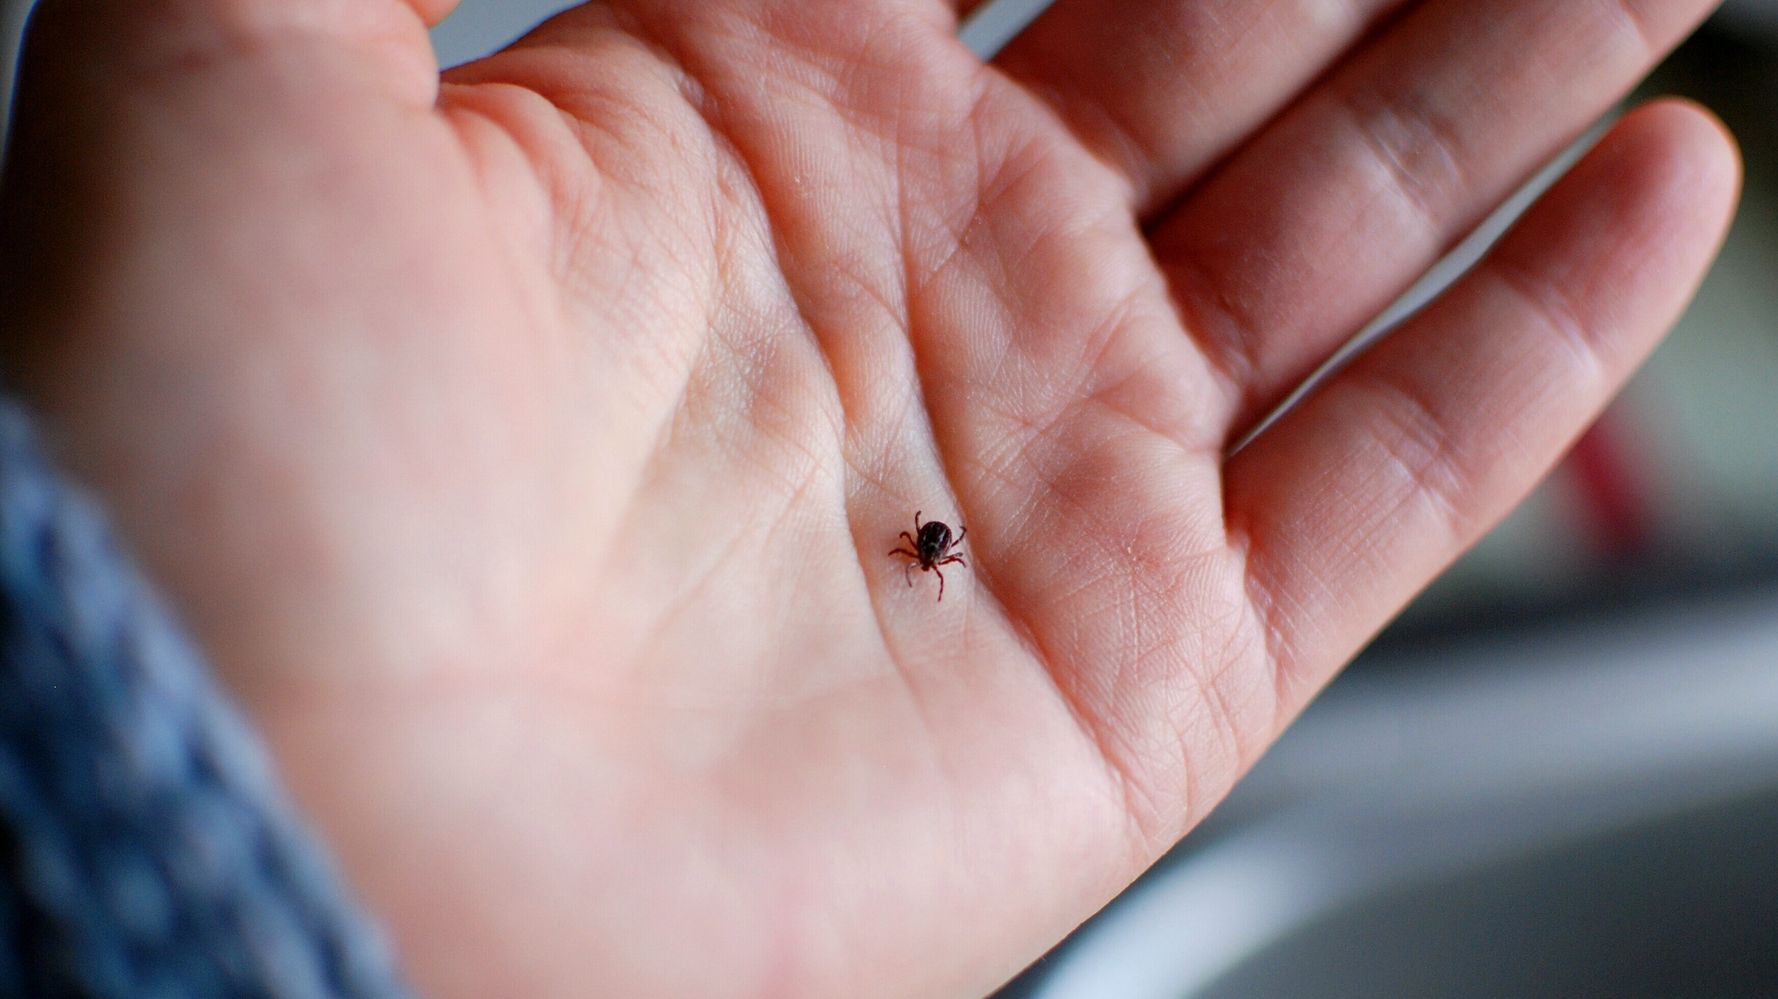 What You Need To Know About Ticks, From Preventing Them To Treating Bites